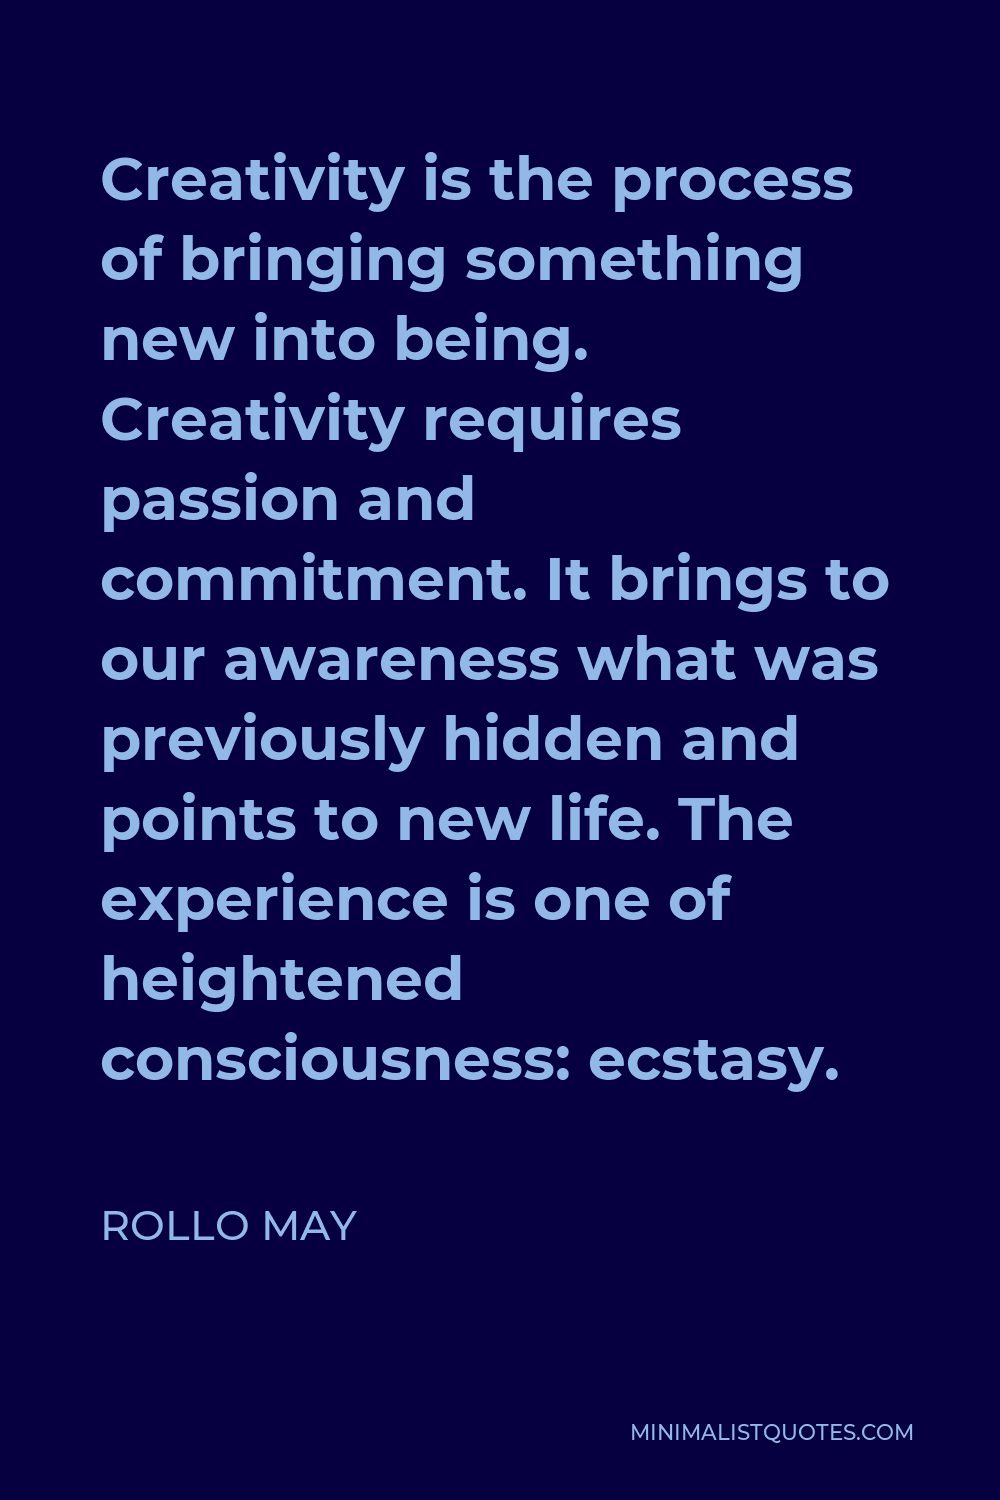 Rollo May Quote - Creativity is the process of bringing something new into being. Creativity requires passion and commitment. It brings to our awareness what was previously hidden and points to new life. The experience is one of heightened consciousness: ecstasy.